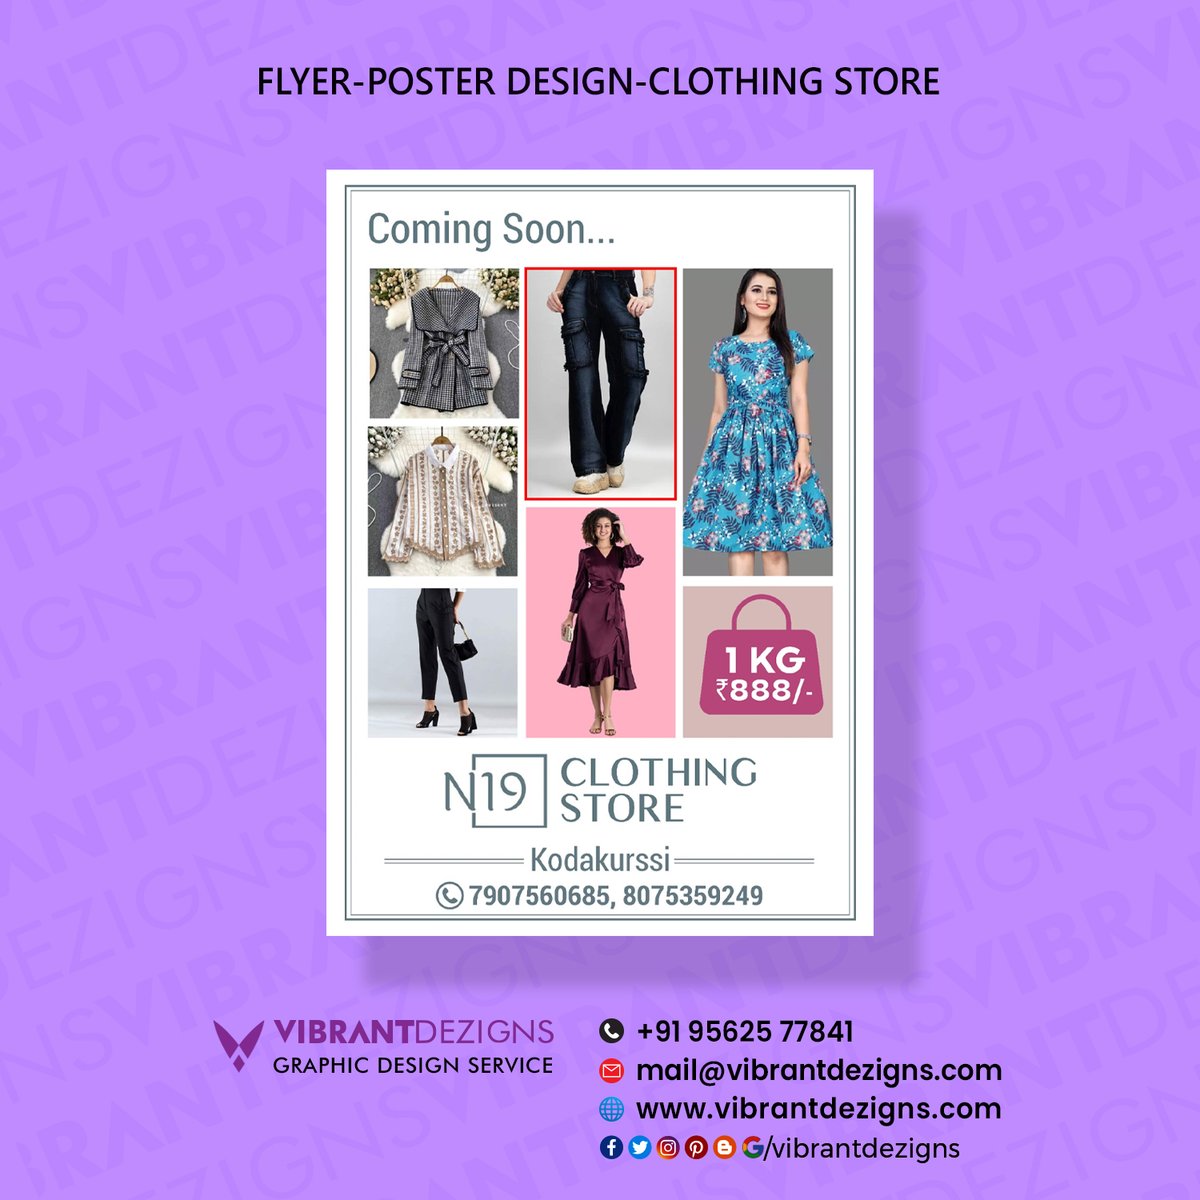 Flyer is best method for promote your business
#graphicdesign works for your business contact 9562577841

Opening soon poster design thrissur-vibrantdezigns

#graphicdesigner #flyerdesign #flyerdesign #flyerdesigns #flyerdesigner #flyerdesigning #businessdesign